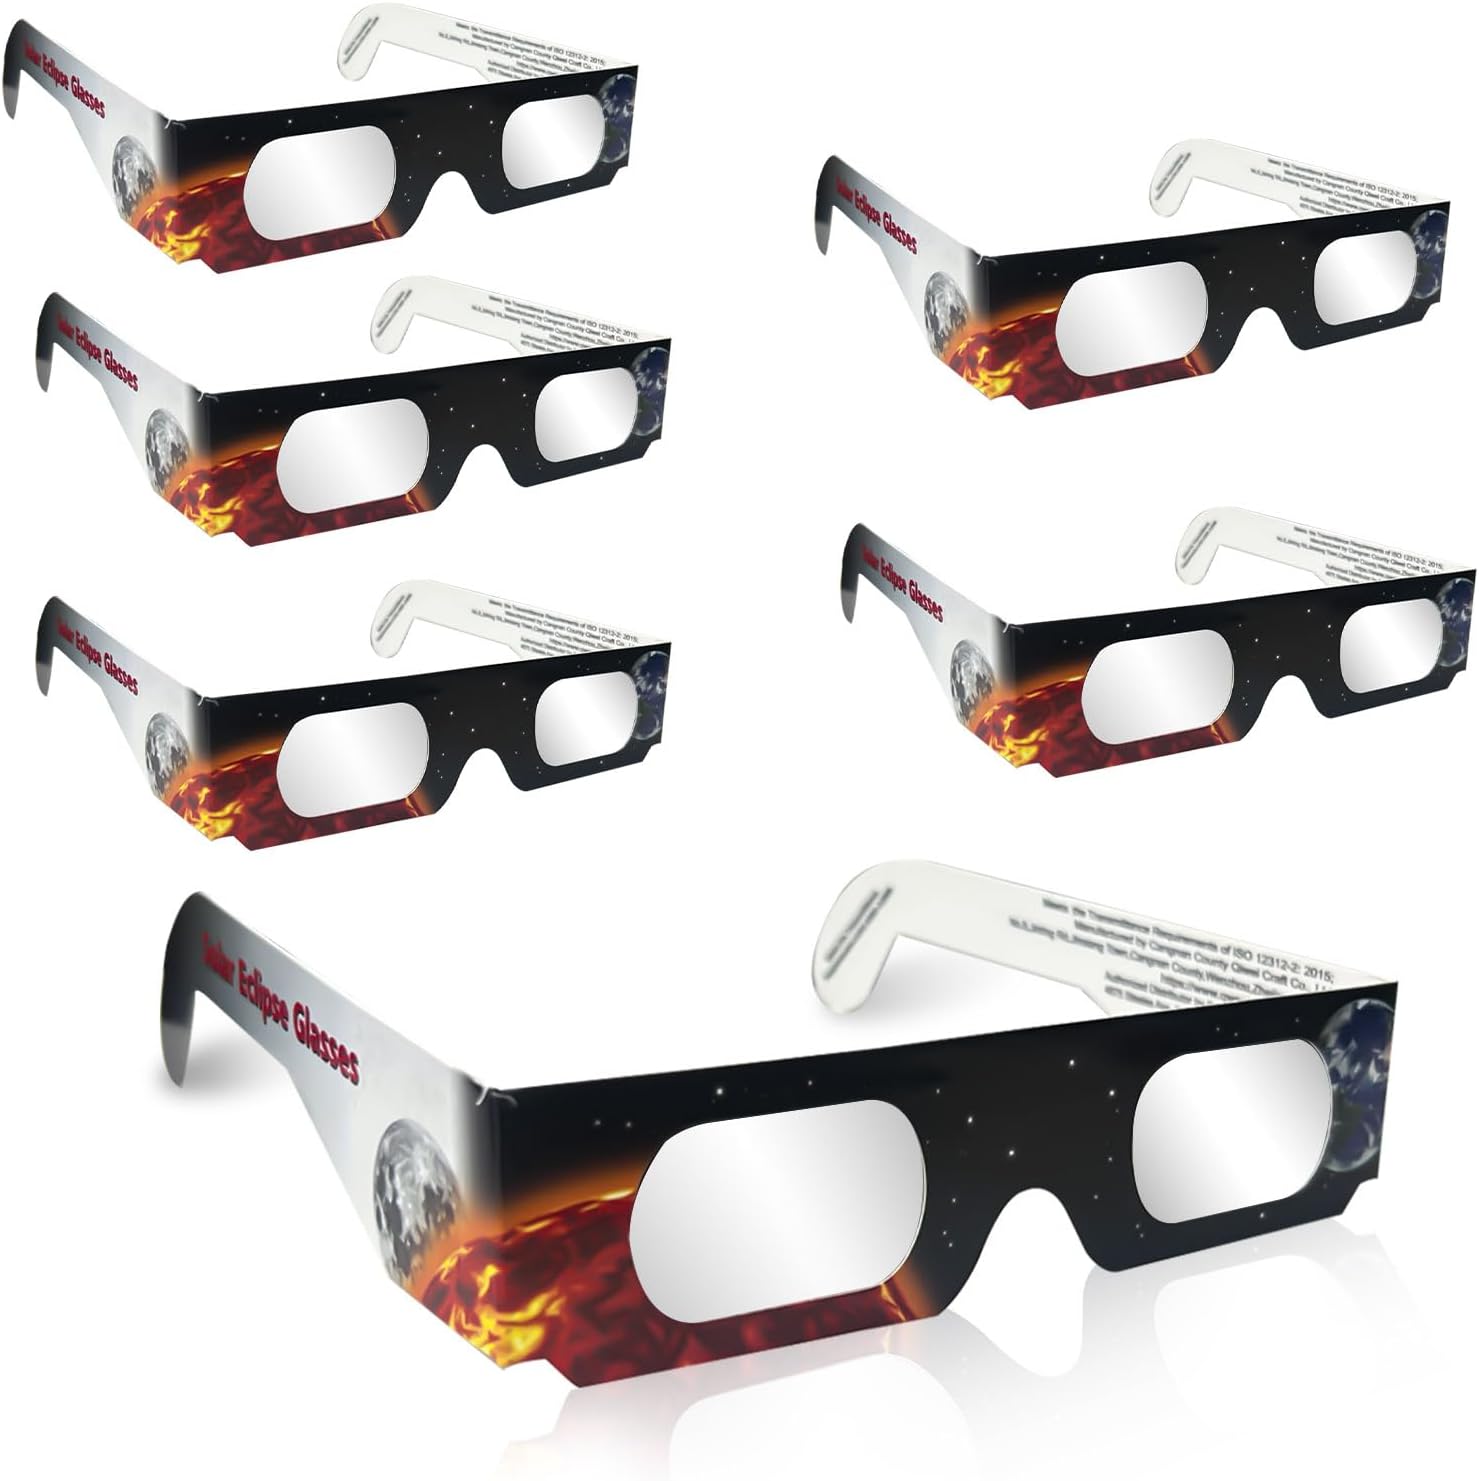 Solar Eclipse Glasses (6 Pack) - CE and ISO Certified Safe Shades for Direct Sun Viewing